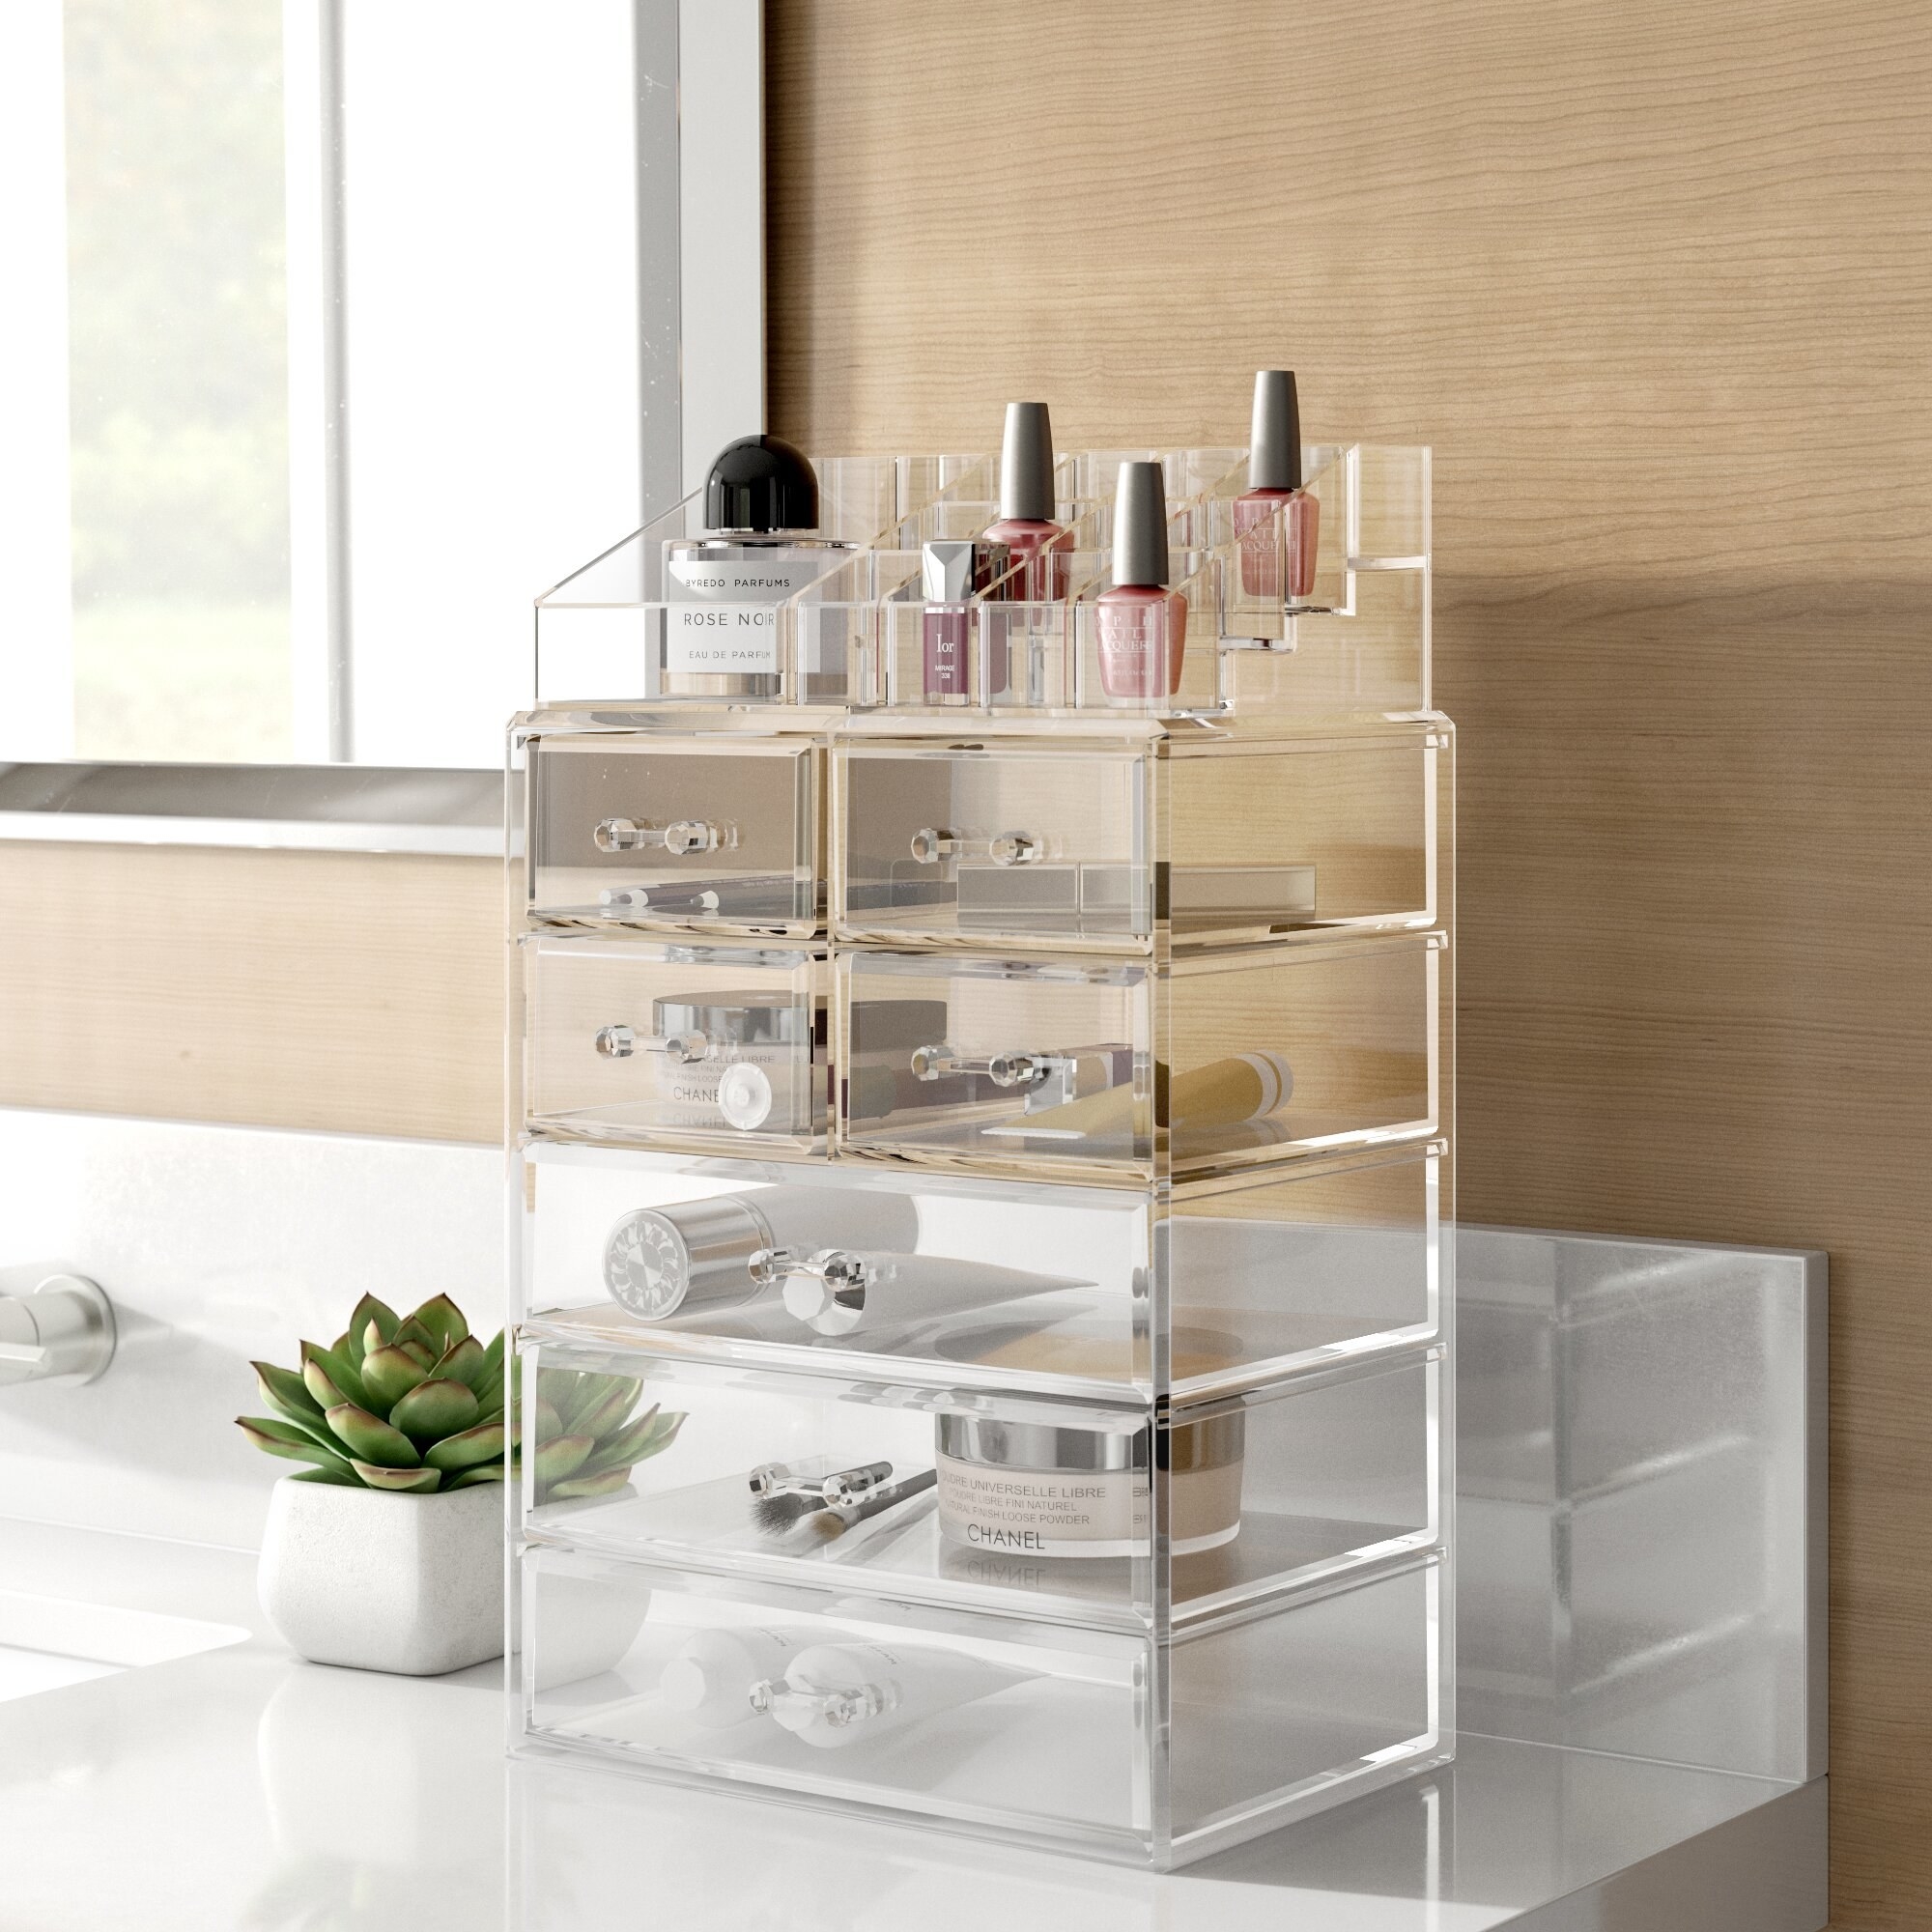 Clear makeup organizer in bathroom filled with brushes, lipsticks, creams, etc.